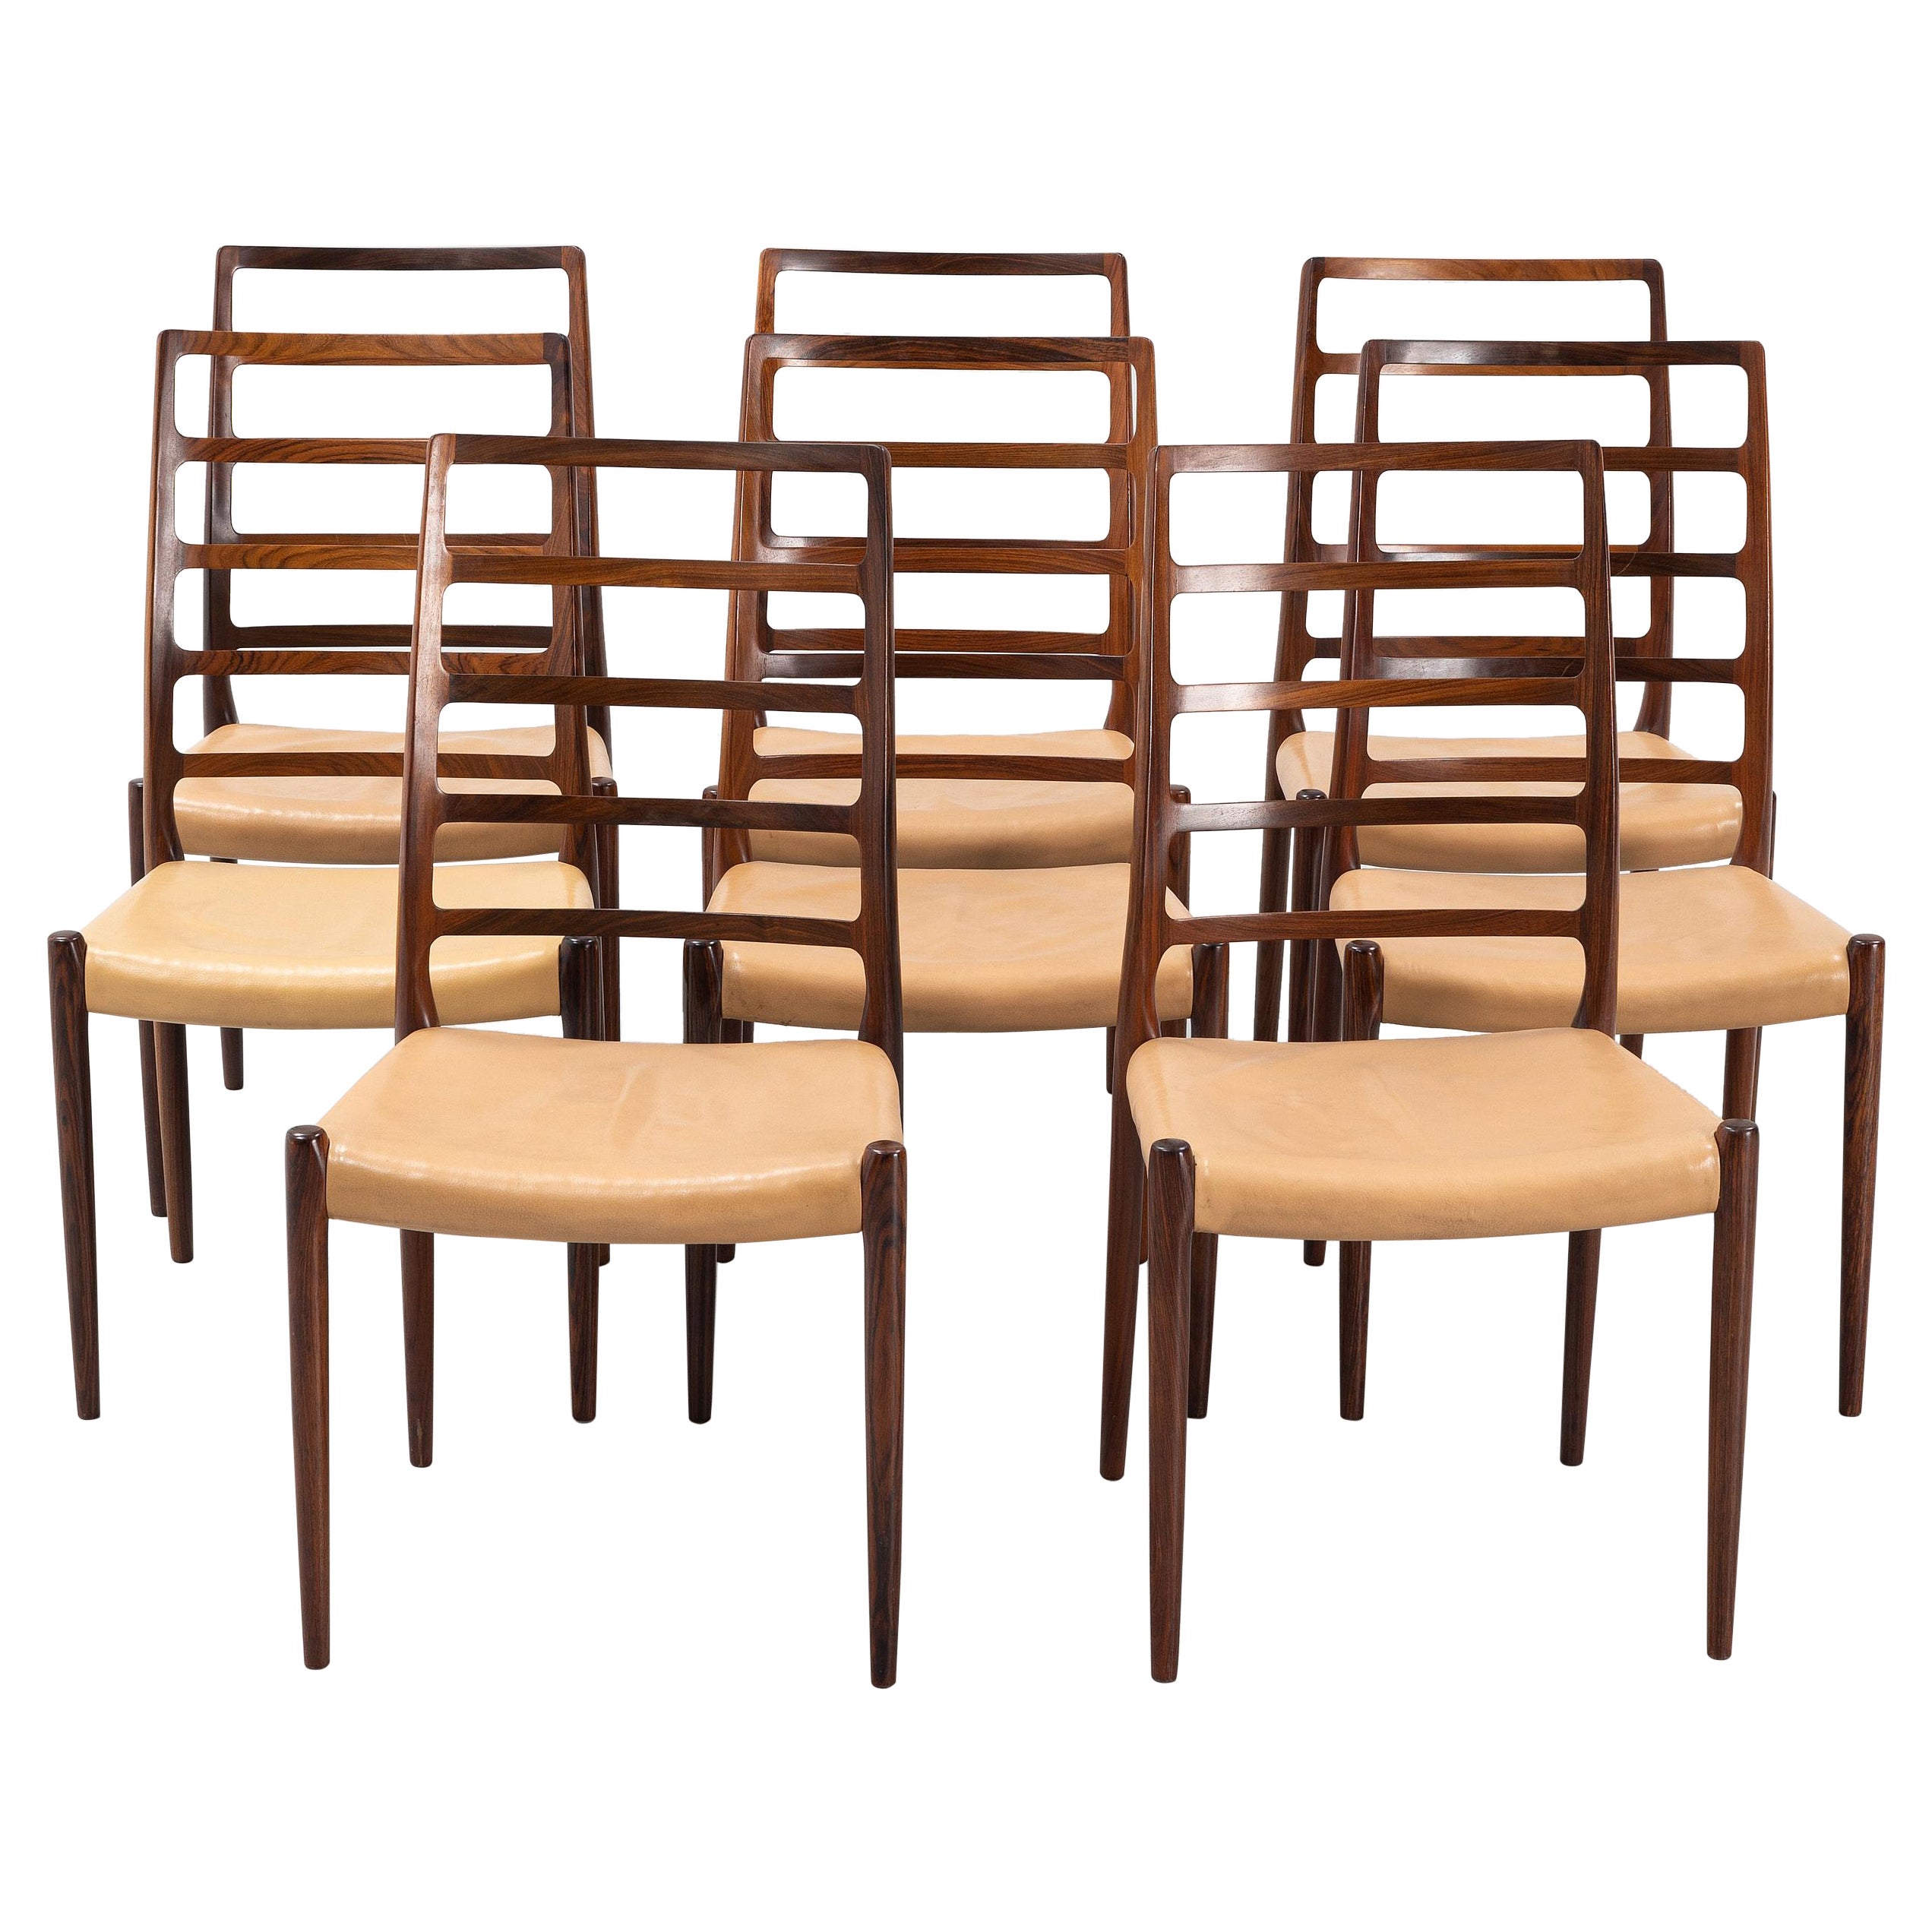 Neils Otto Moller Dining Chairs Mod 82, Set of 8 in Rosewood Denmark 1960 For Sale